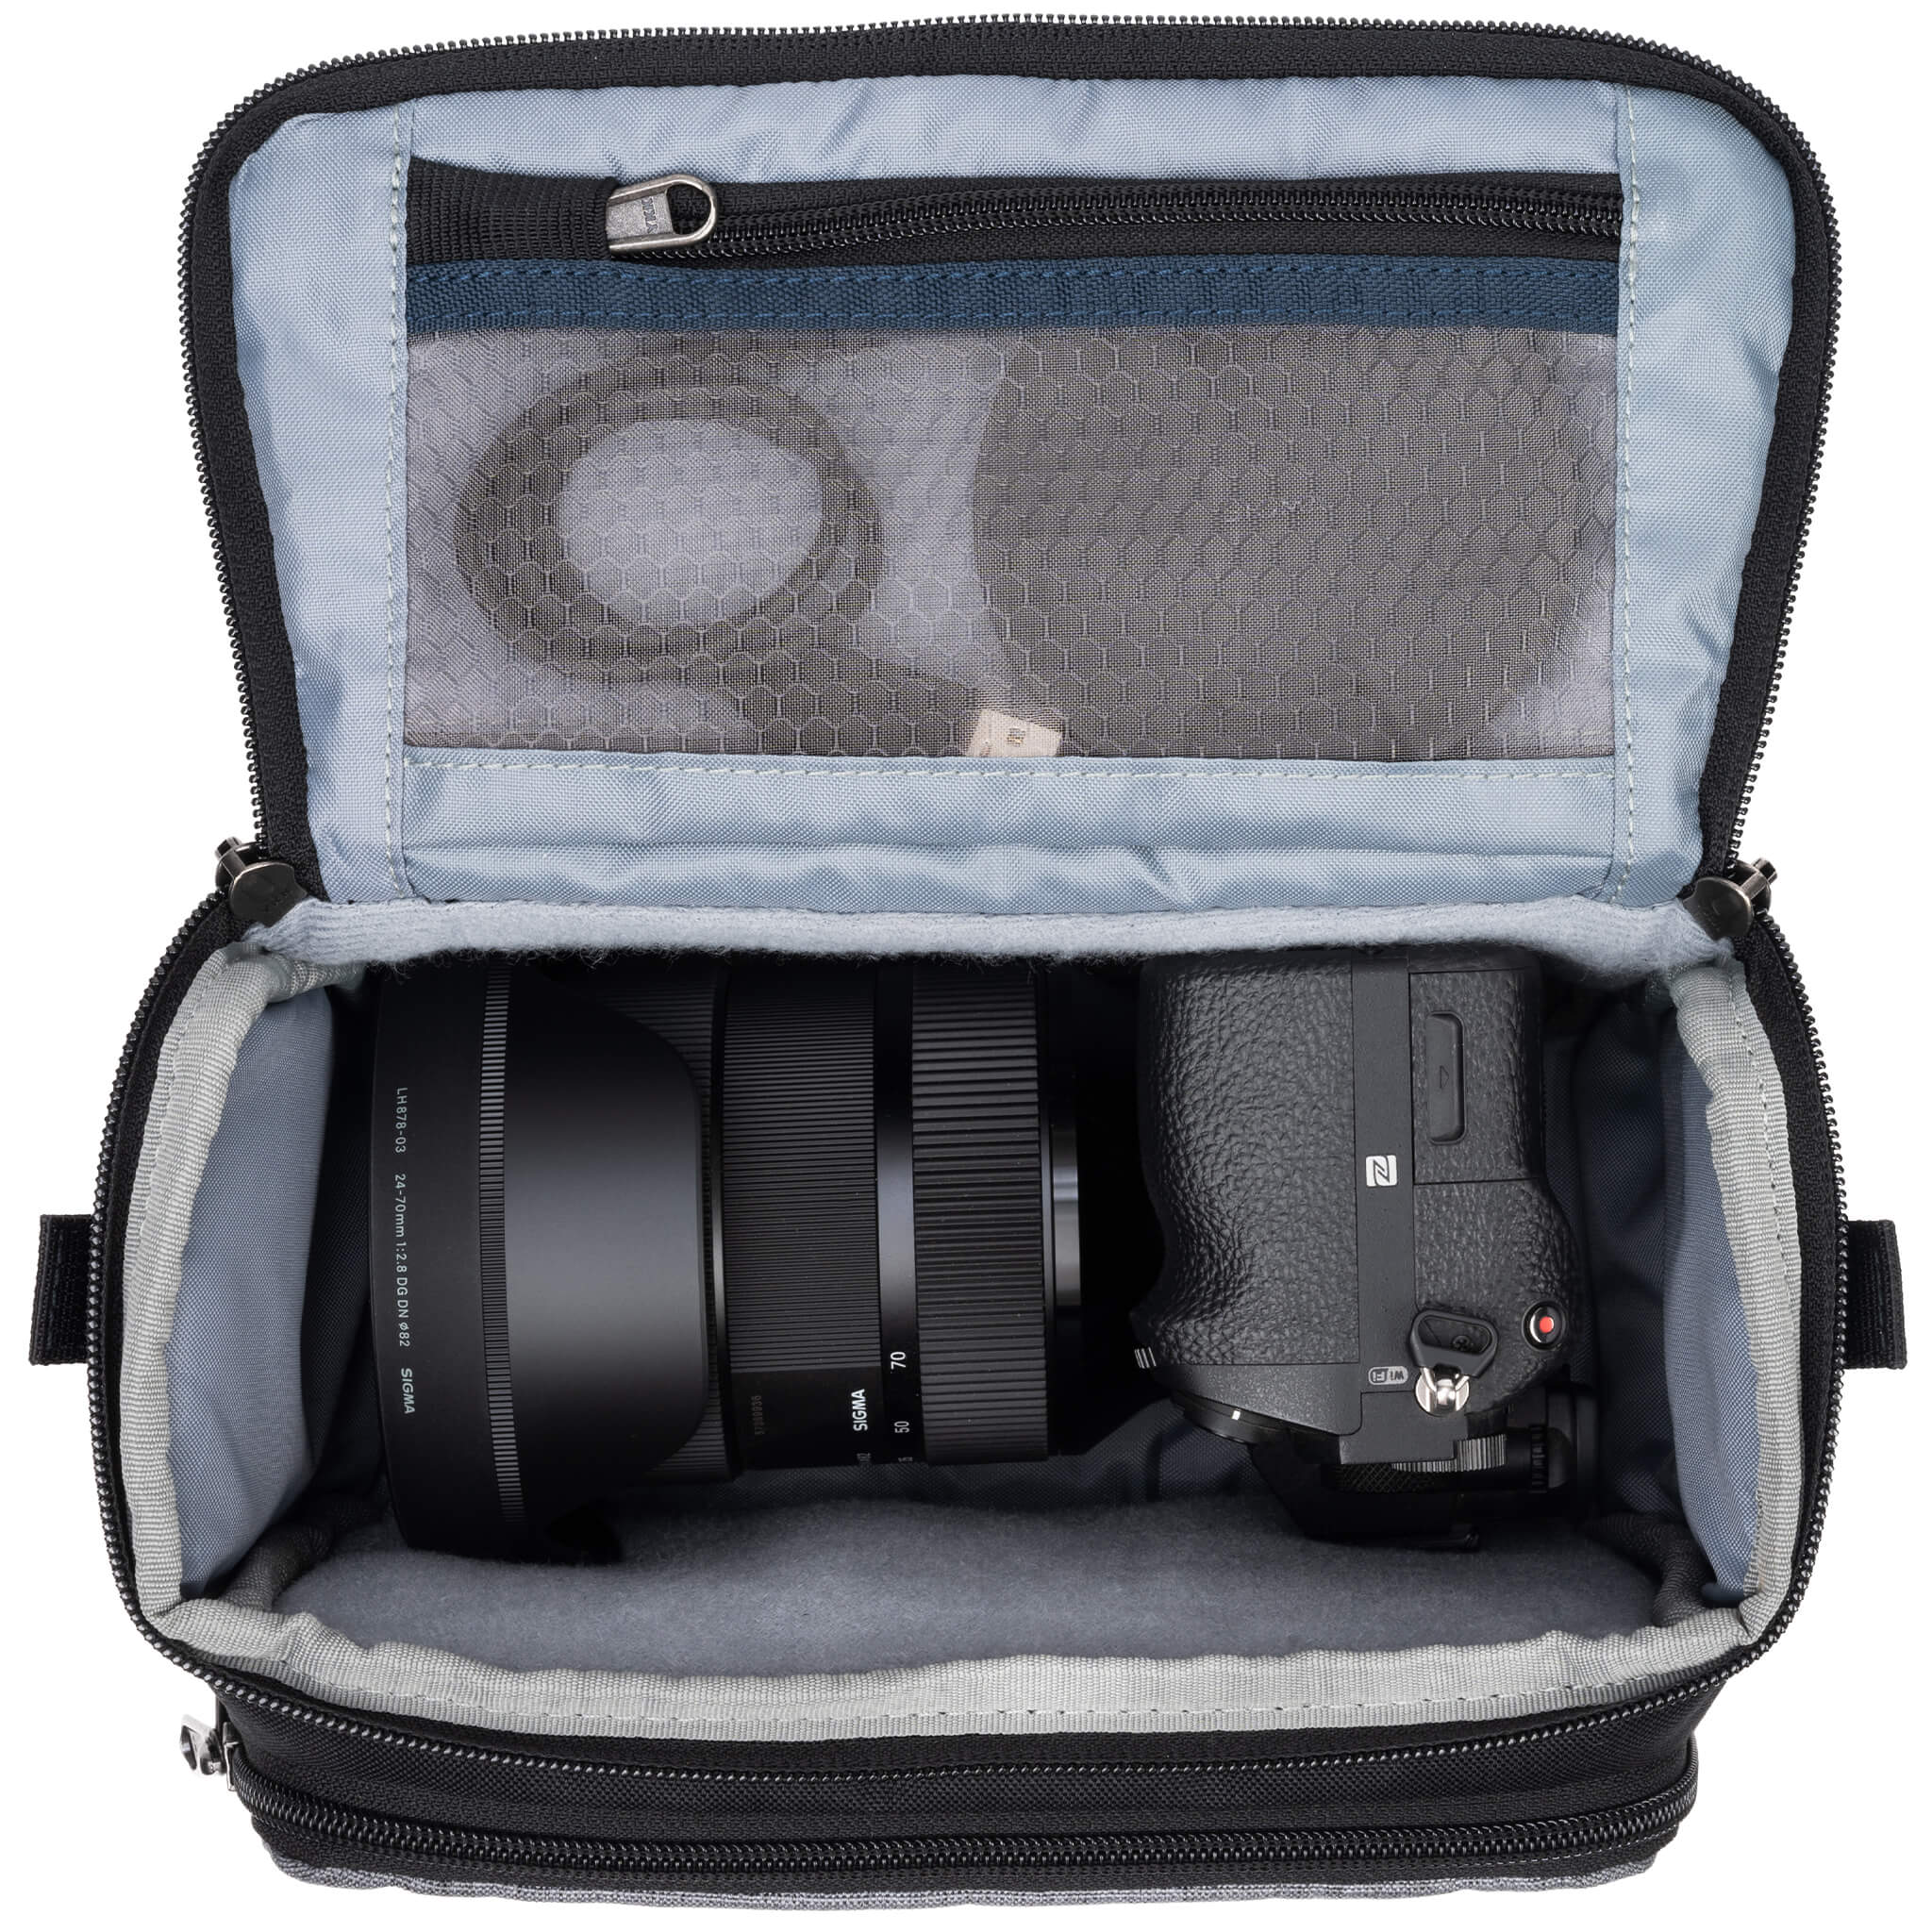 Fits one standard mirrorless body plus 1 to 2 lenses: short to medium f/4 zooms or short to medium primes.